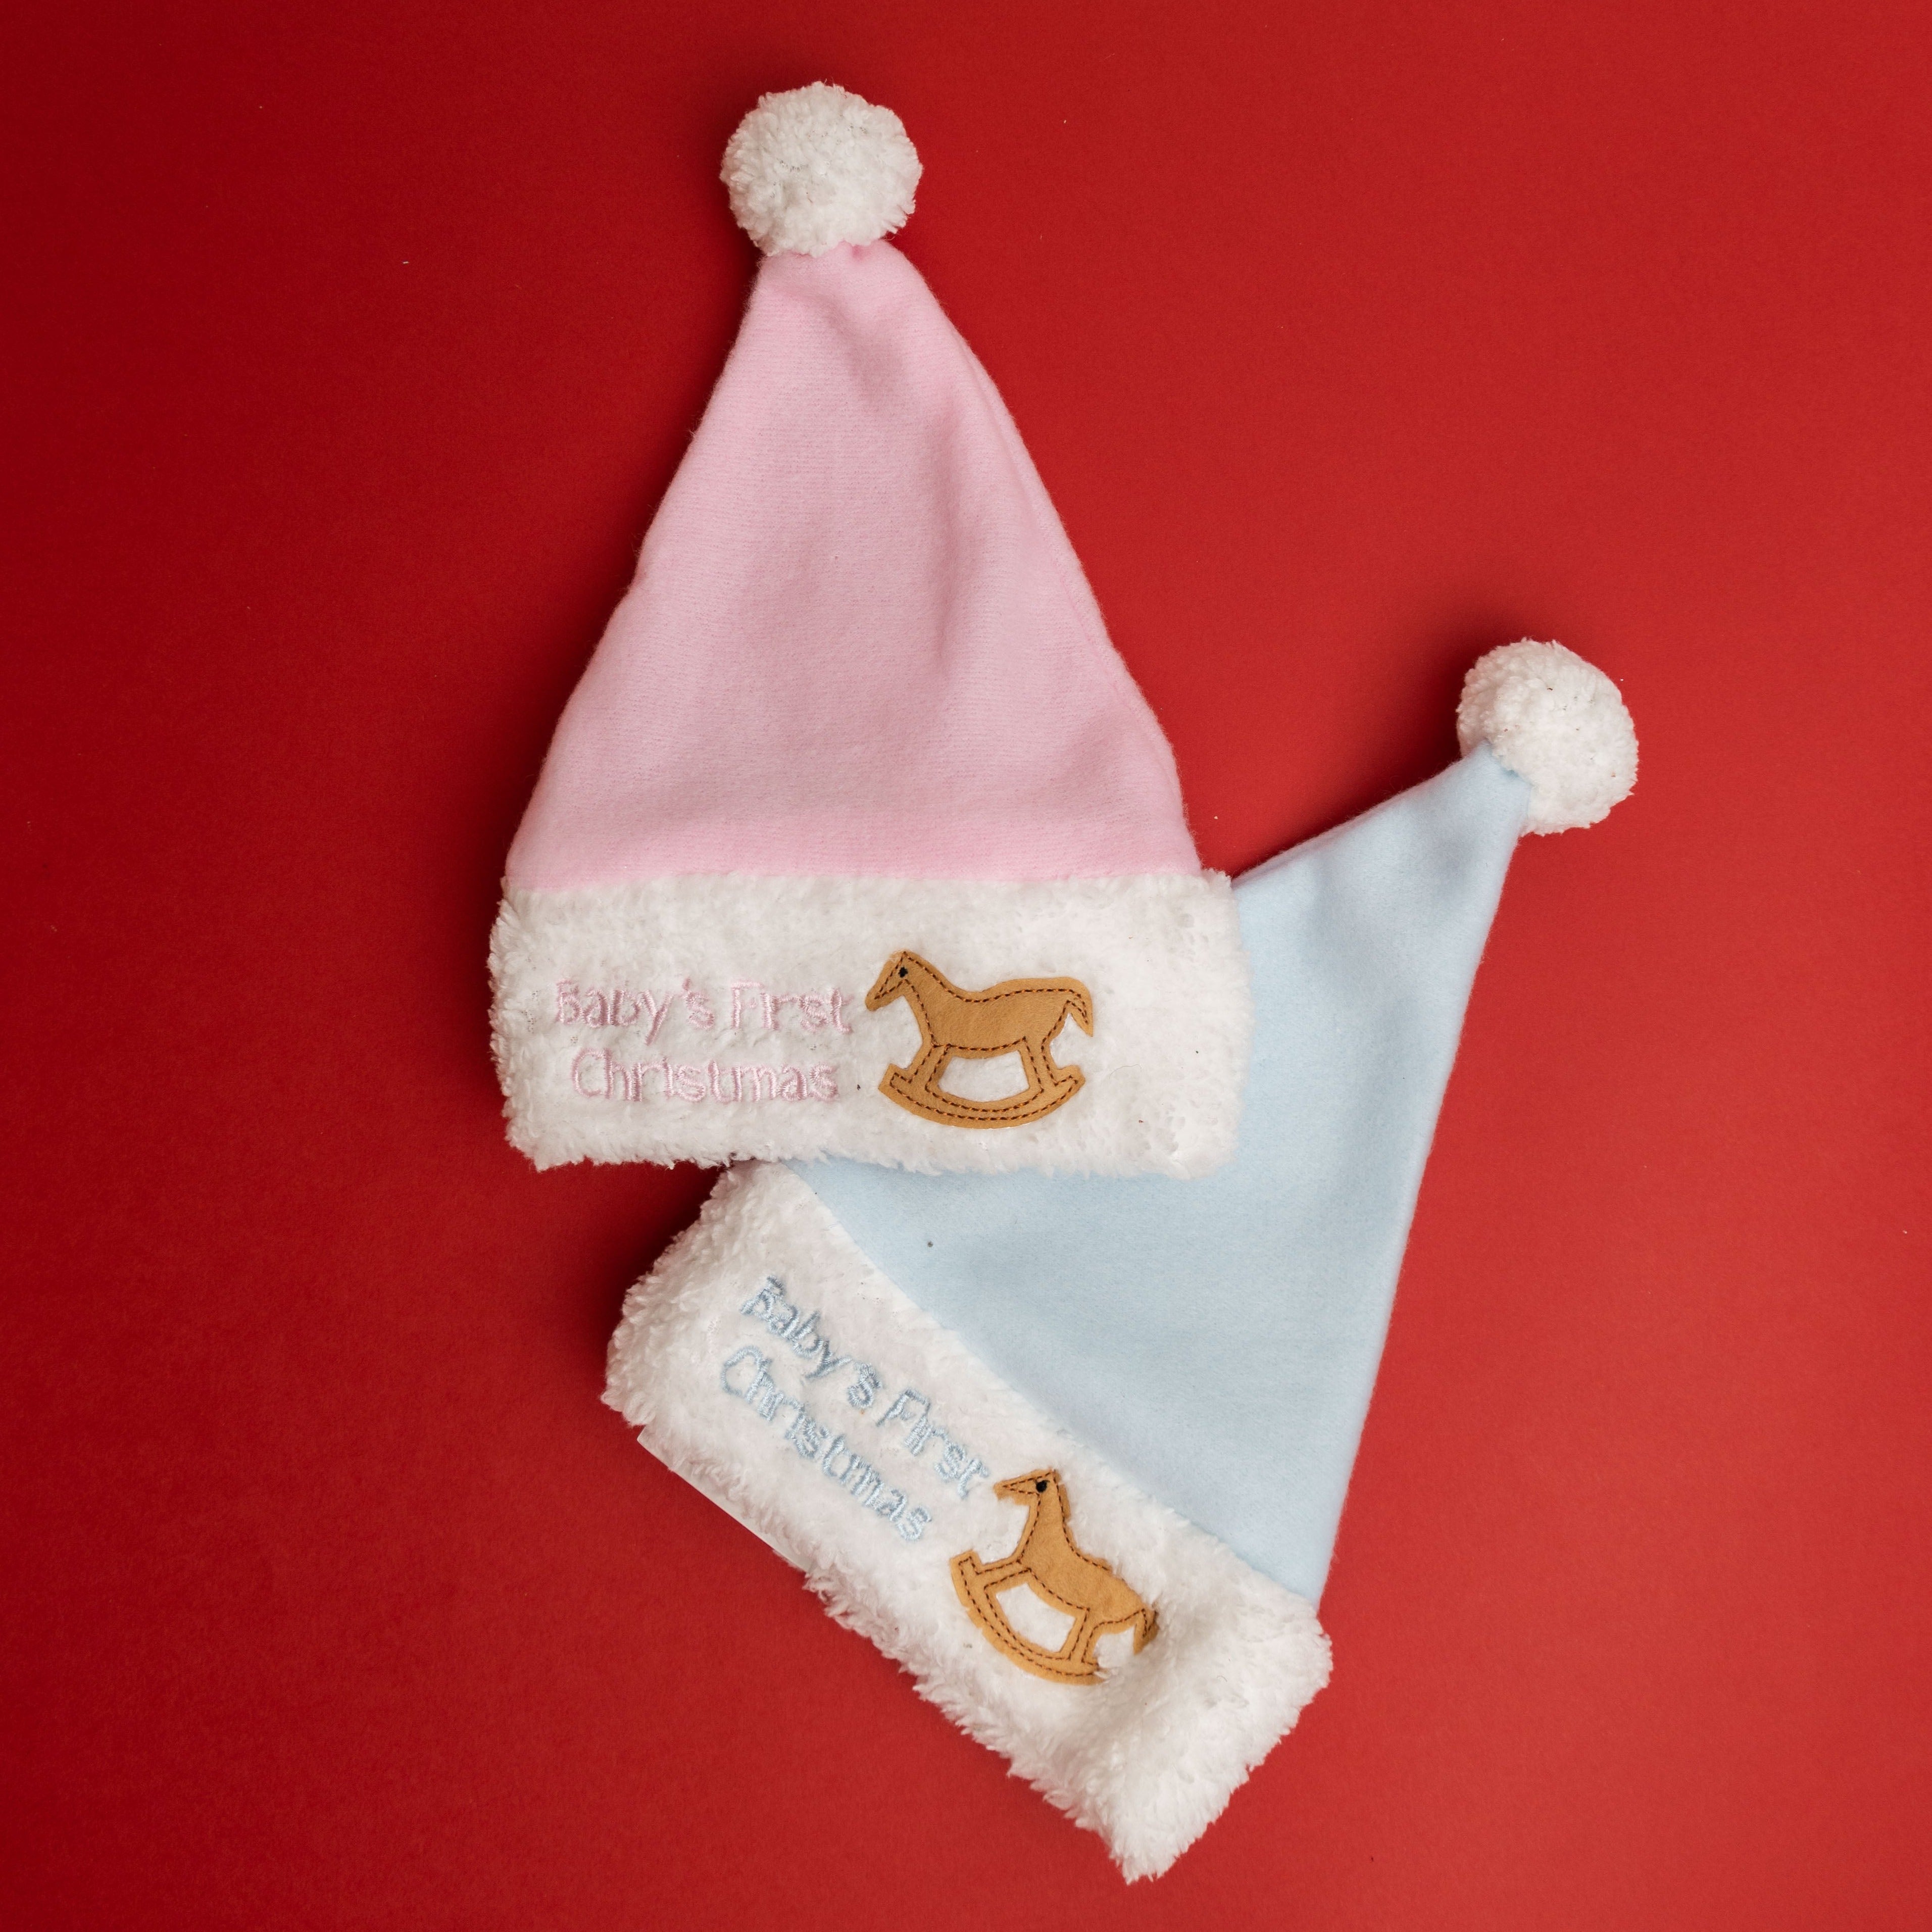 Cute baby's first christmas hats